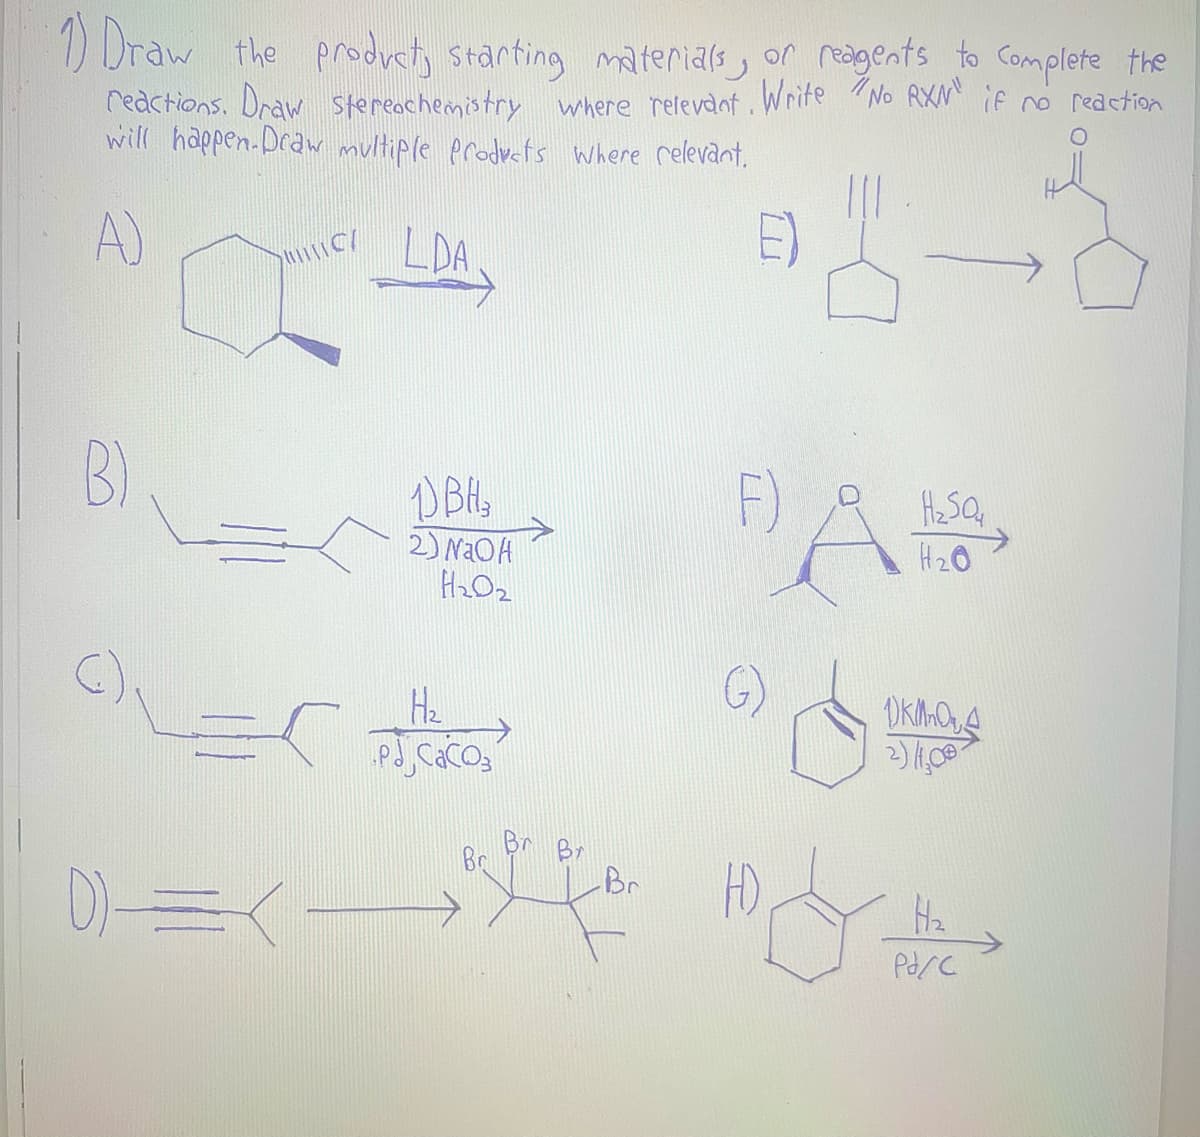 1) Draw the product, starting materials, or reagents to complete the
reactions. Draw Stereochemistry where relevant. Write "No RXN" if no reaction
will happen. Draw multiple products where relevant.
A)
2
B)
C/
OLES
D)=(-
LDA
1) BH 3
2) NaOH
H₂0₂
H₂
pdj cacos
Br
Br
F)
A
H₂SO4
H₂O
OKMOA
2) 1,00
H₂
Pd/C